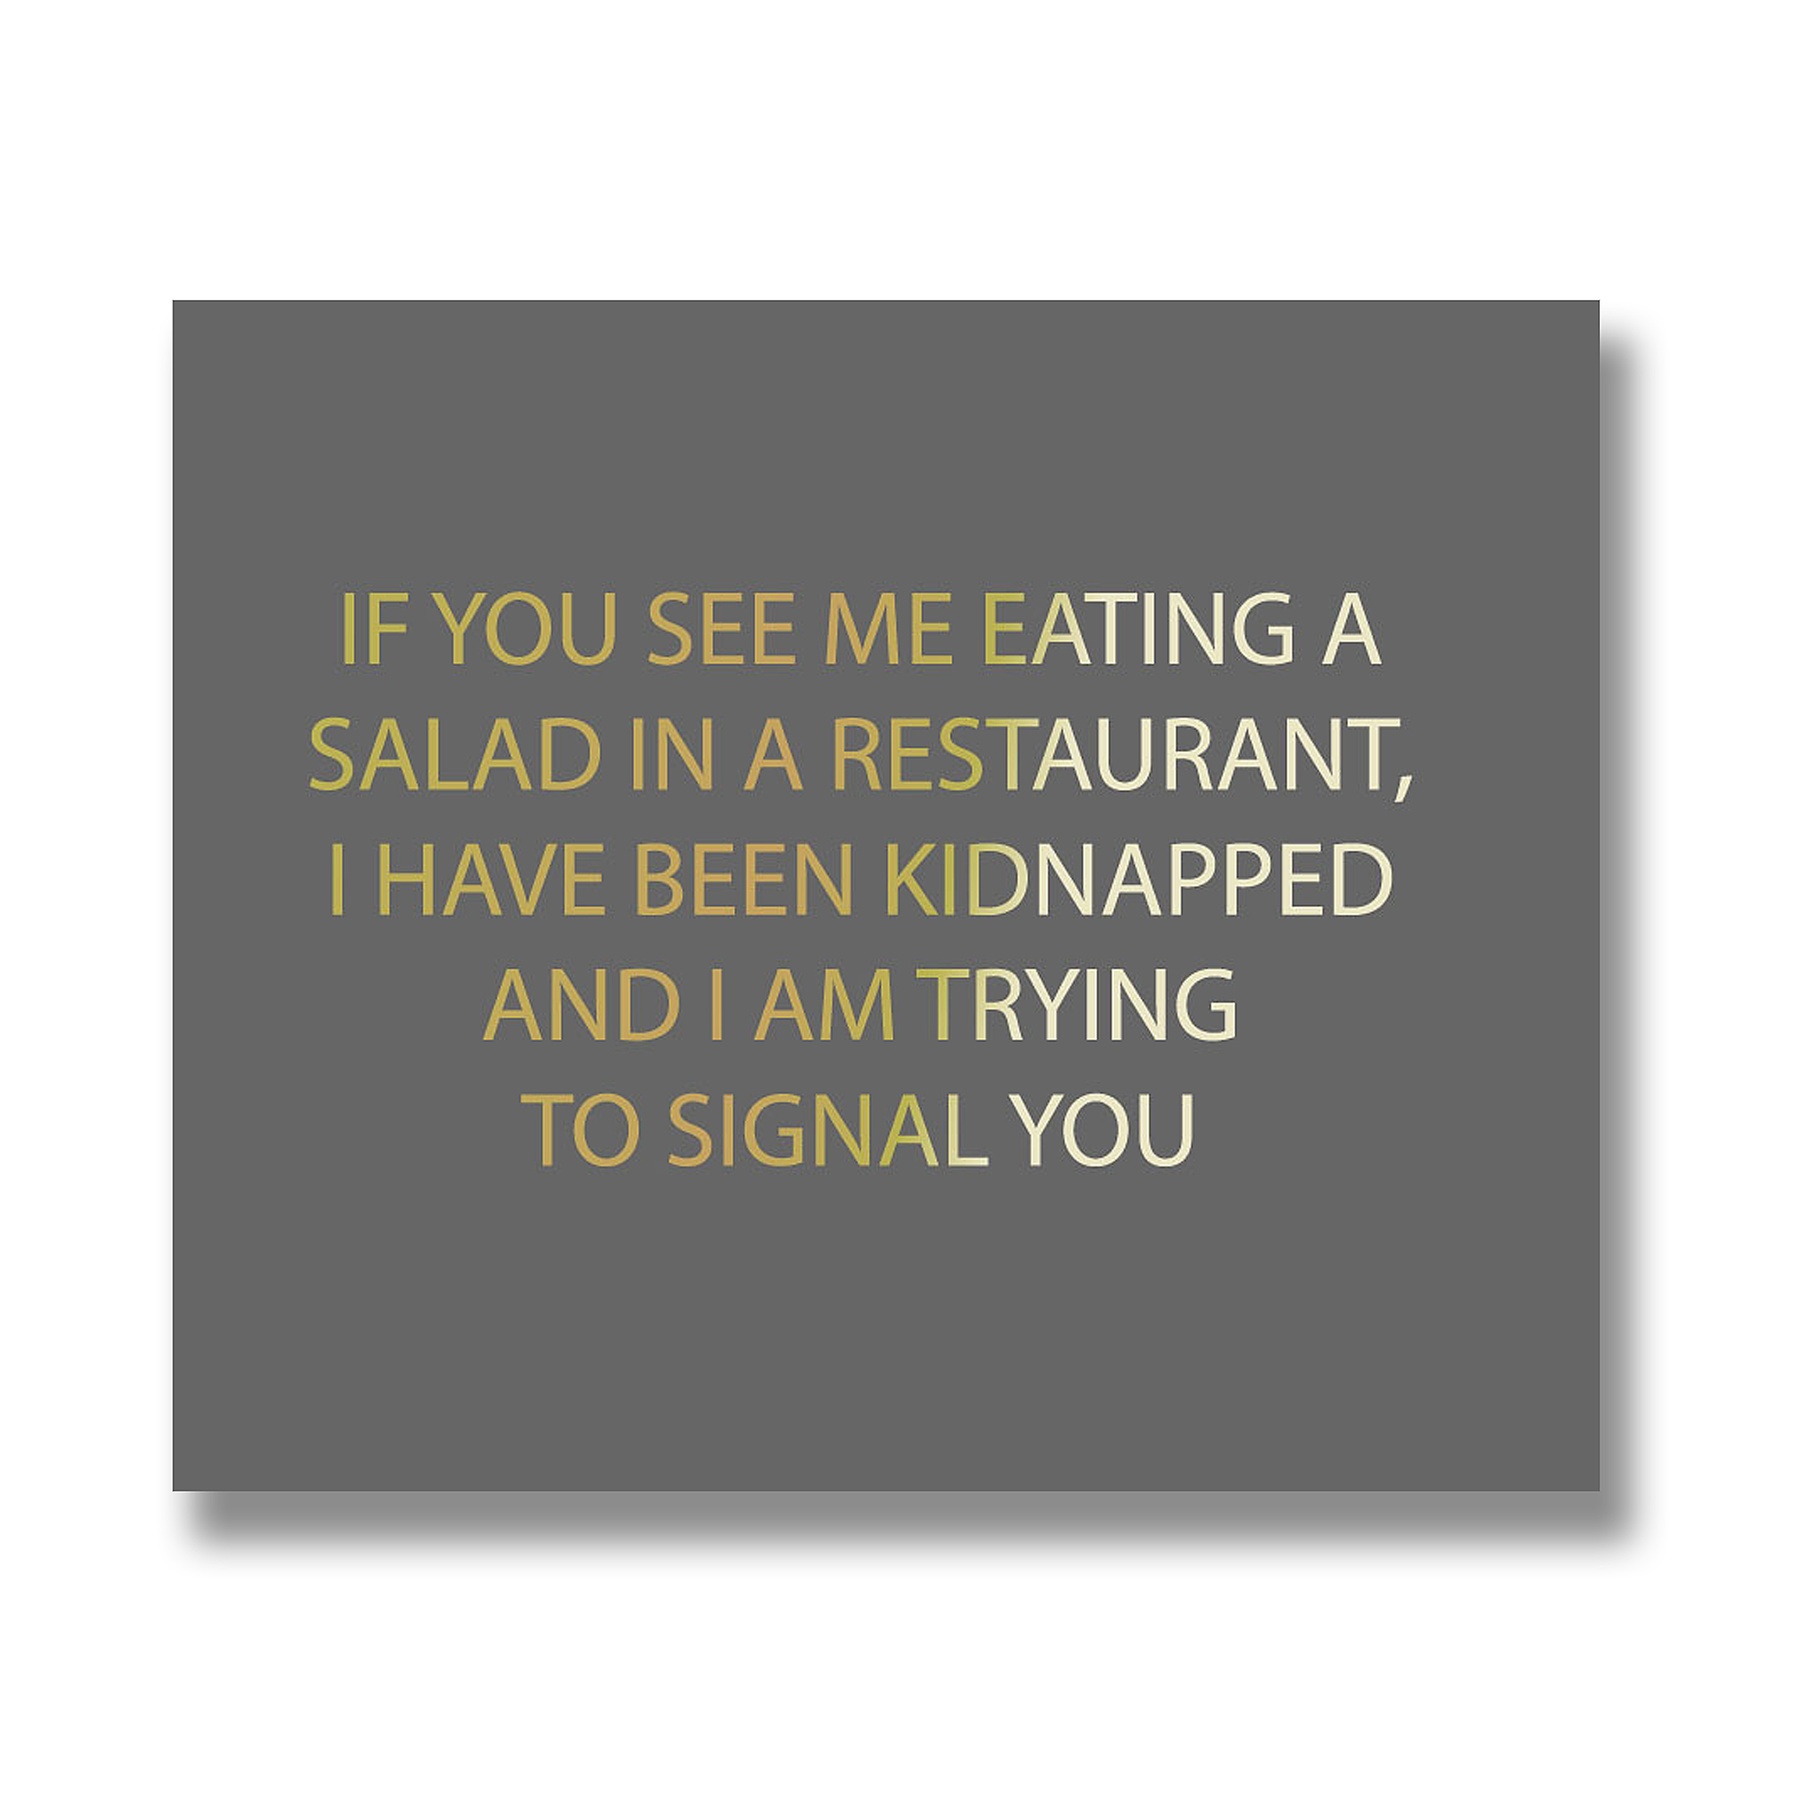 Kidnapped Silver Foil Plaque - Image 1